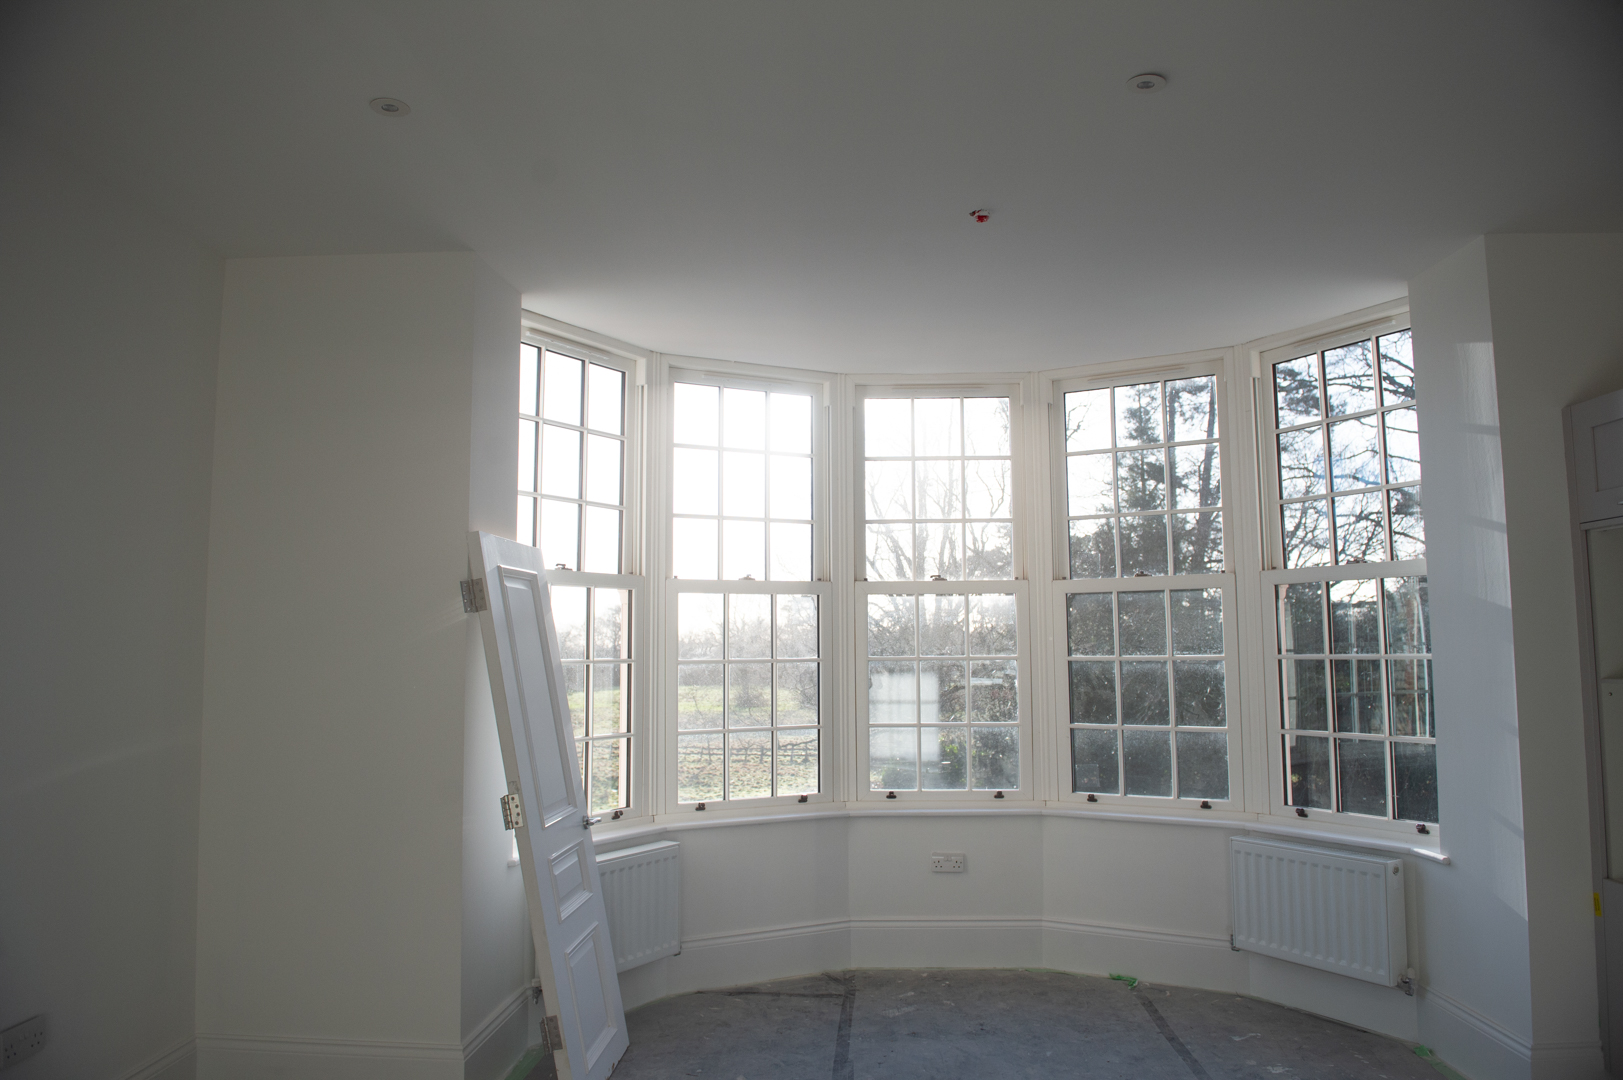 FEBRUARY UPDATE - NEW HOMES AT MILLFIELD PARK ESSEX